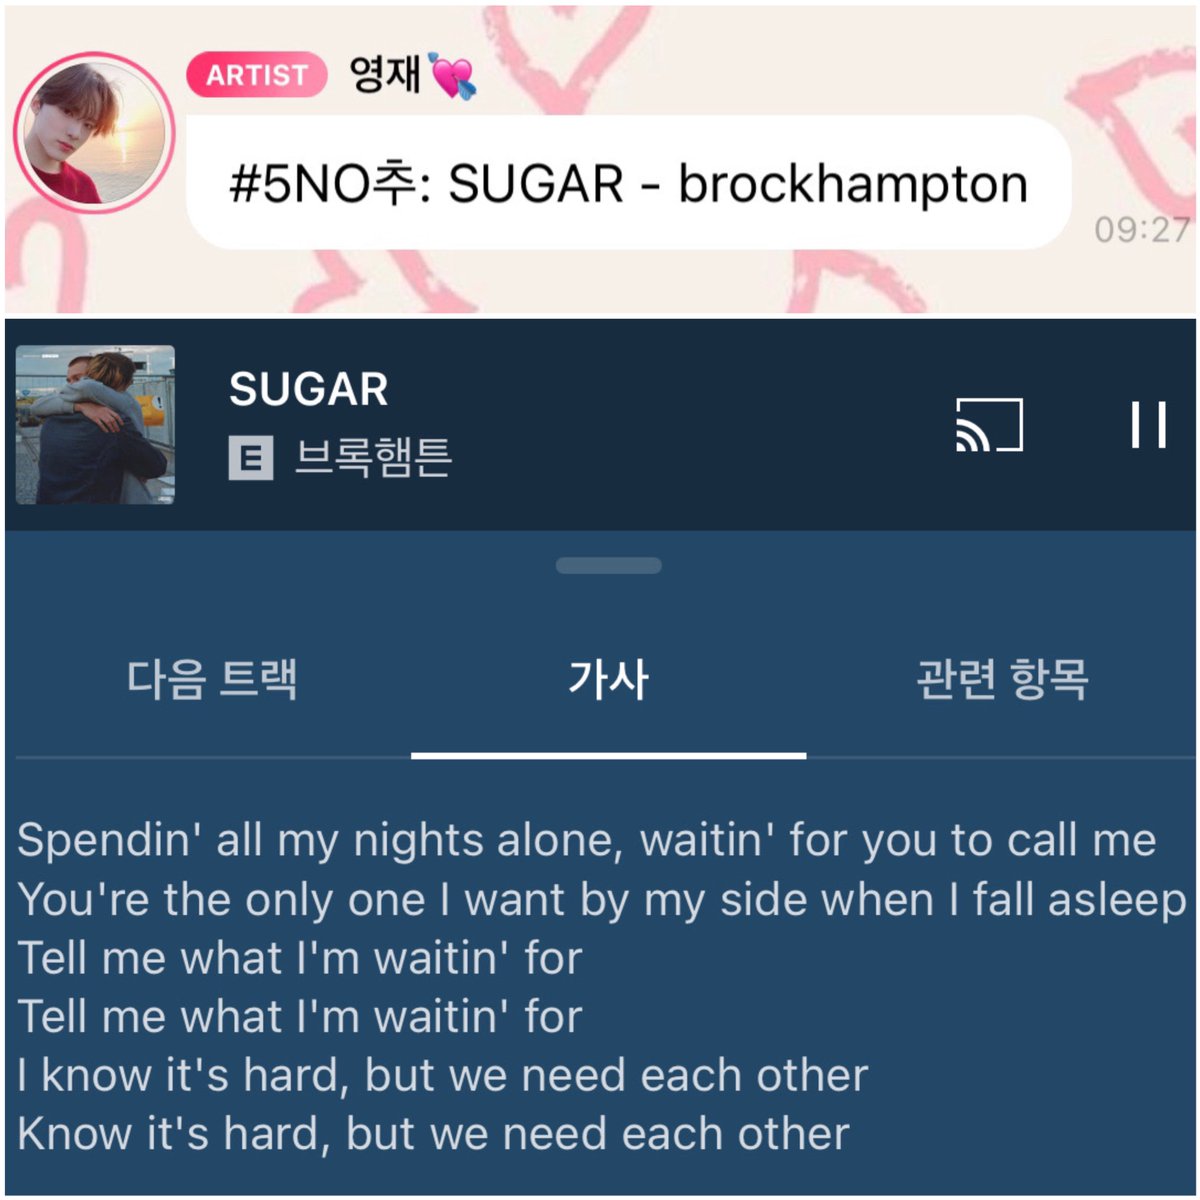 #5NO추: SUGAR - brockhampton ♥️

'I know it's hard, but we need each other'